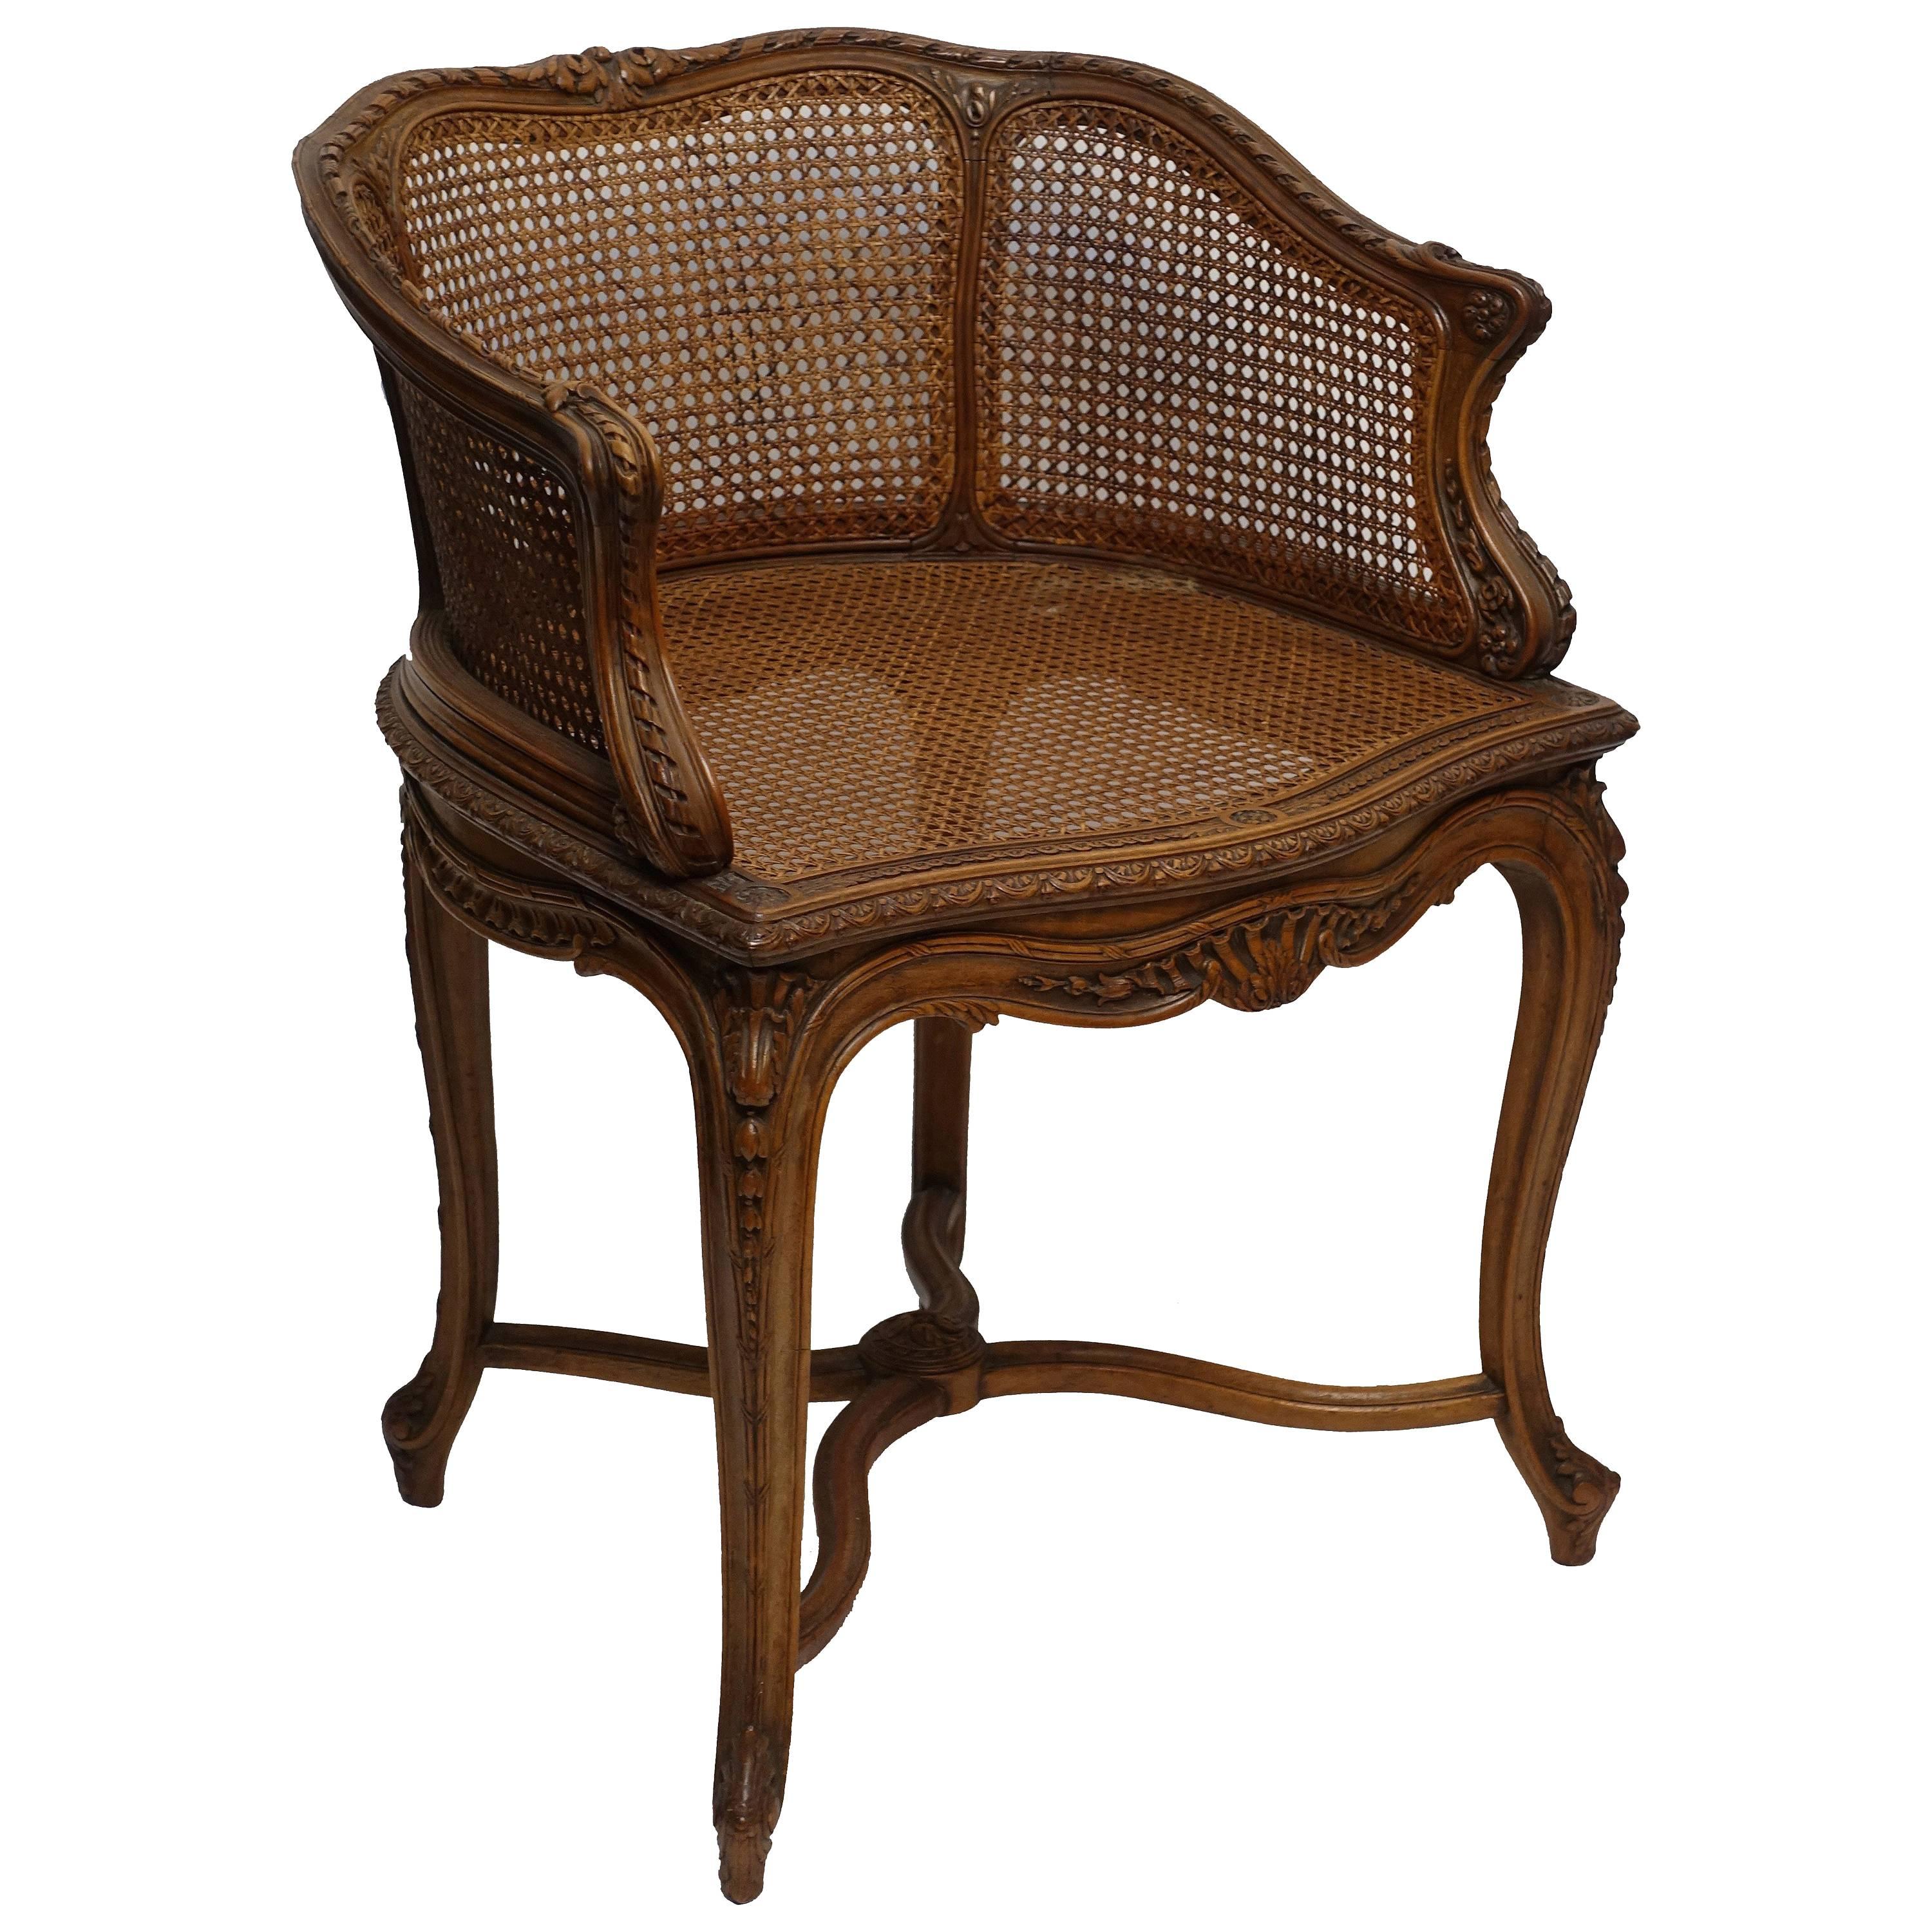 Carved Walnut Vanity Dressing Table Bergere Chair, French, circa 1900